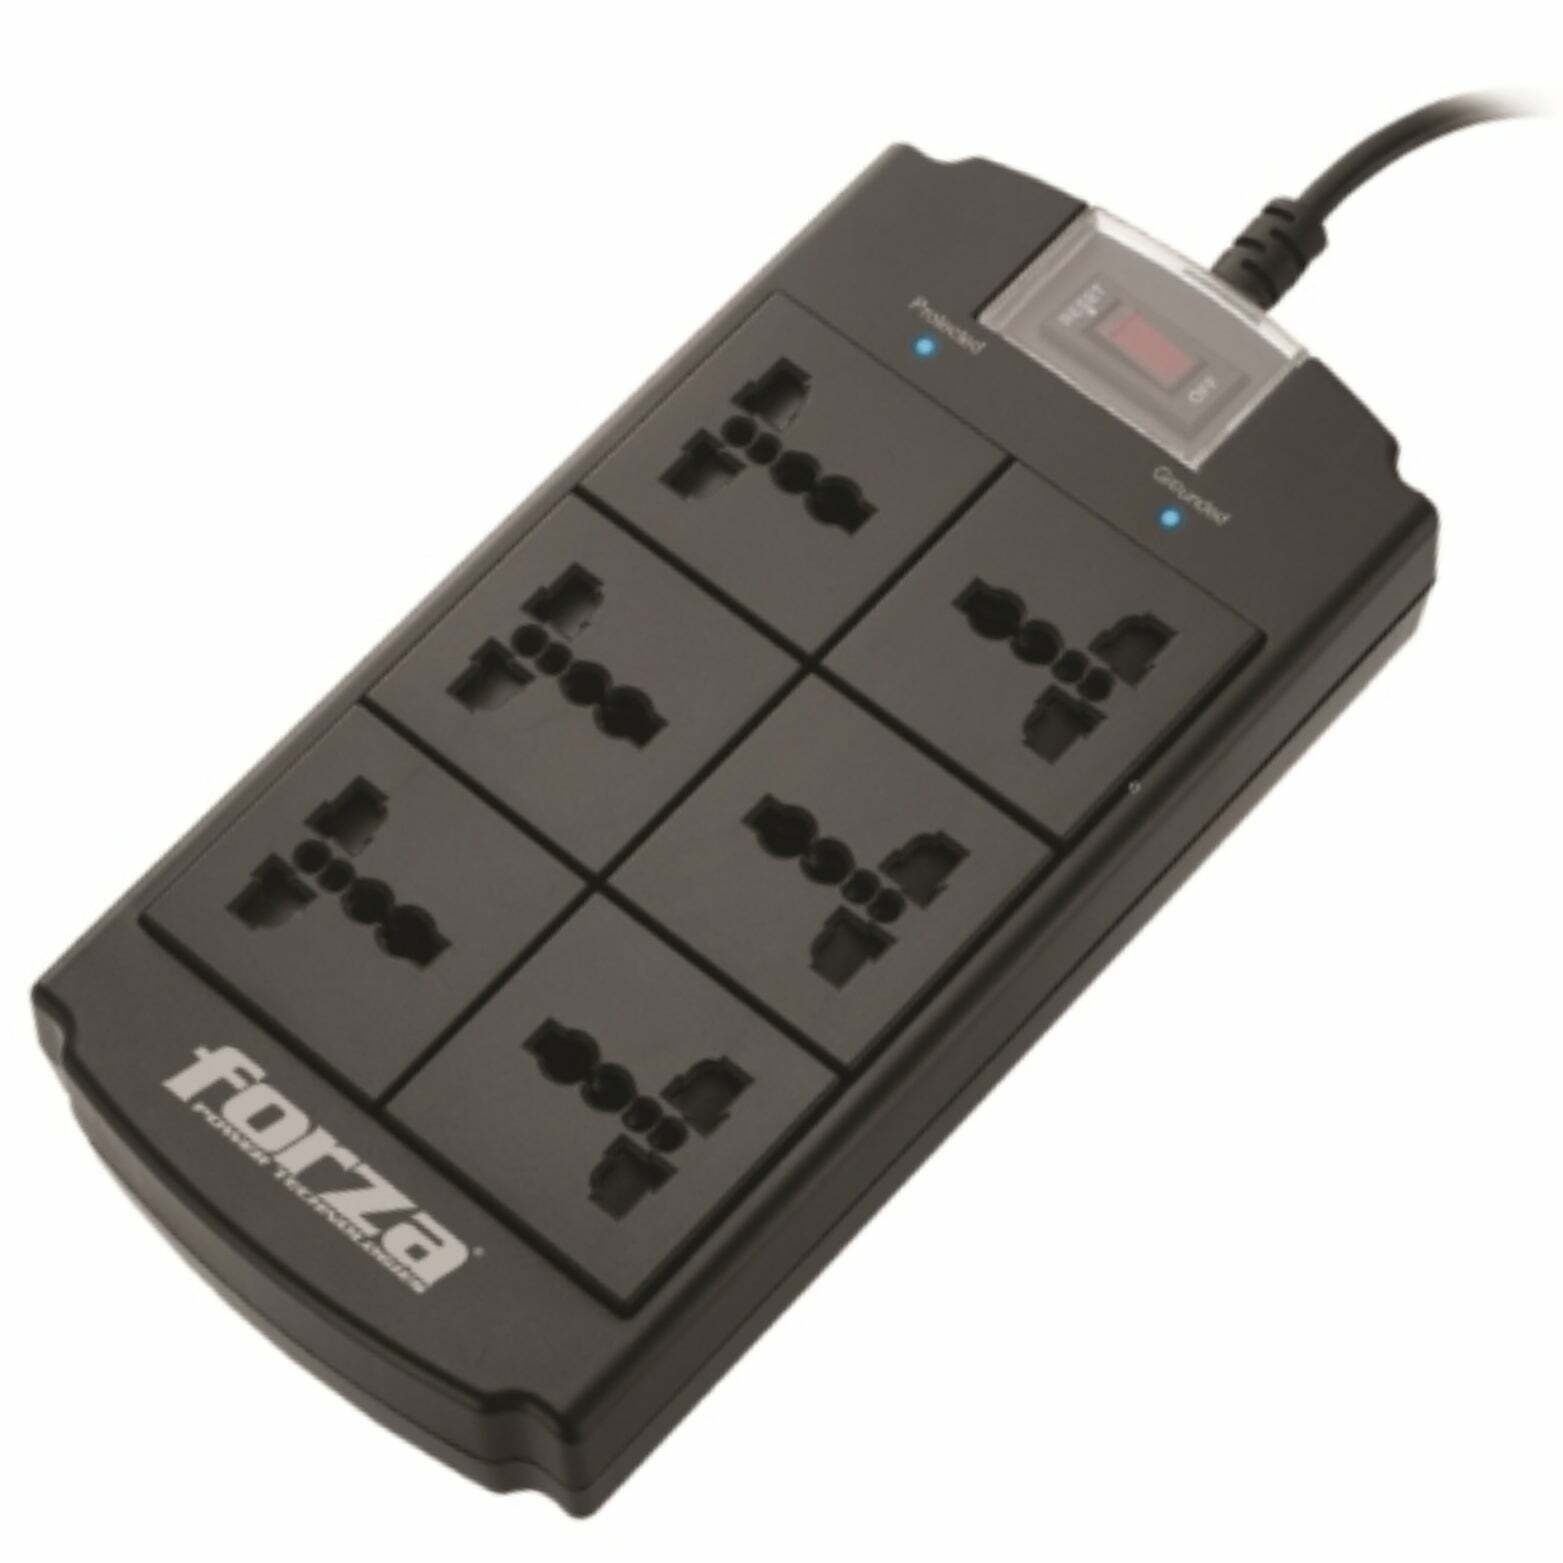 Forza Power Technologies - Surge Protector 250J/1800W, 6 Universal Outlets 120V/240V